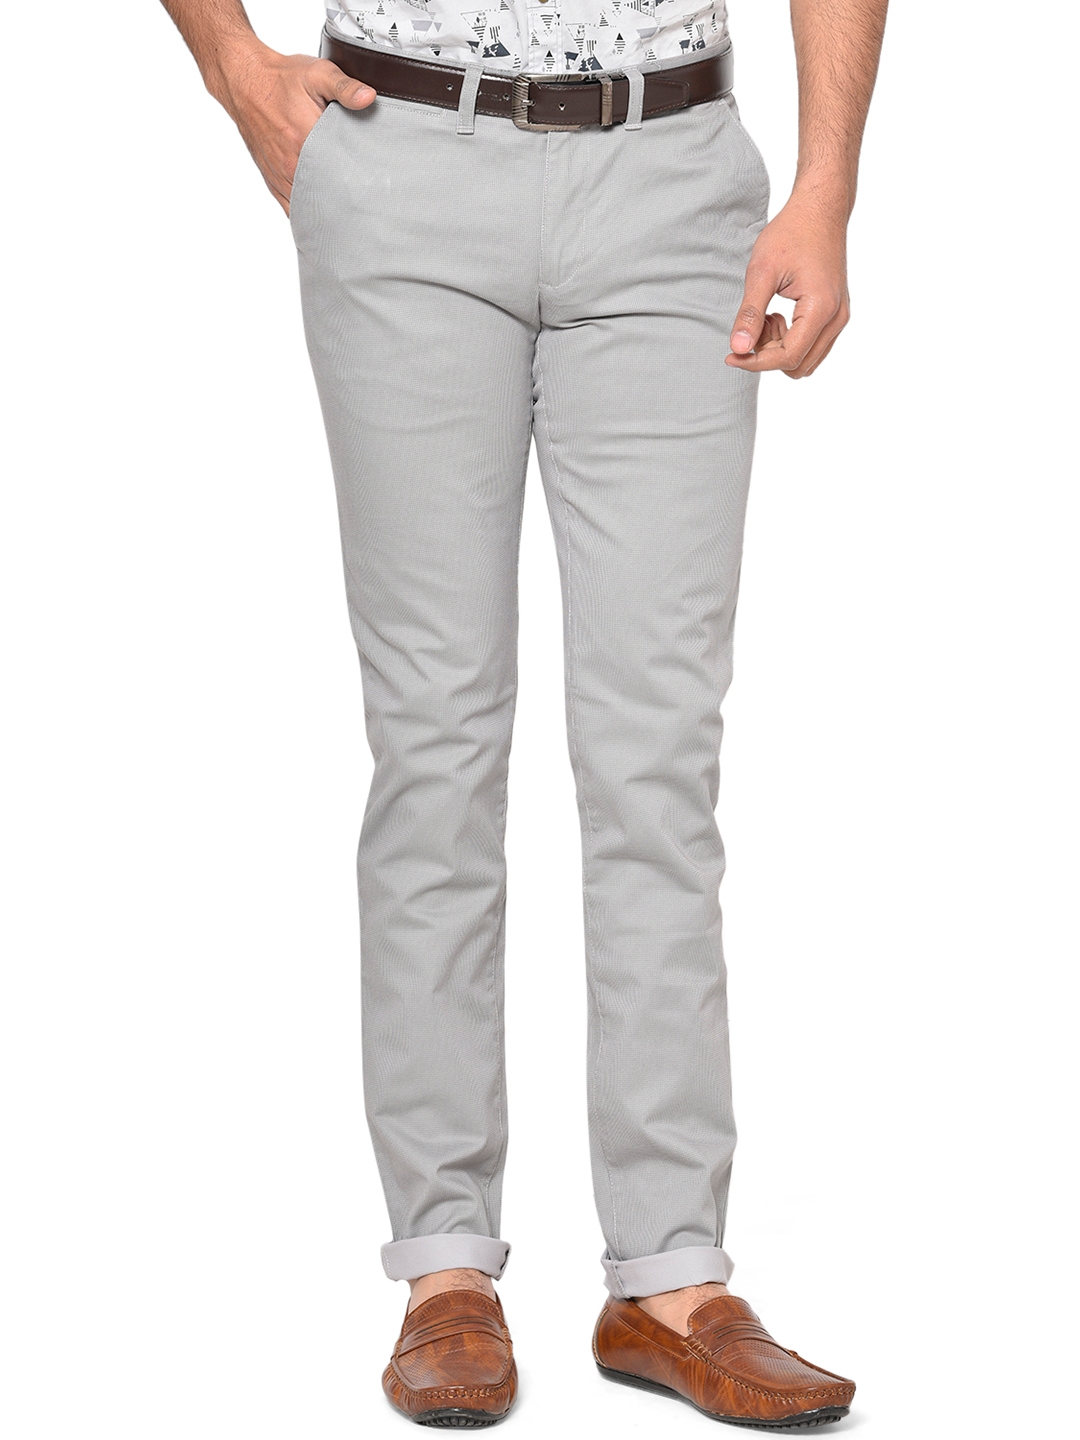 Greenfibre | Steel Grey Solid Super Slim Fit Casual Trouser | Greenfibre 0